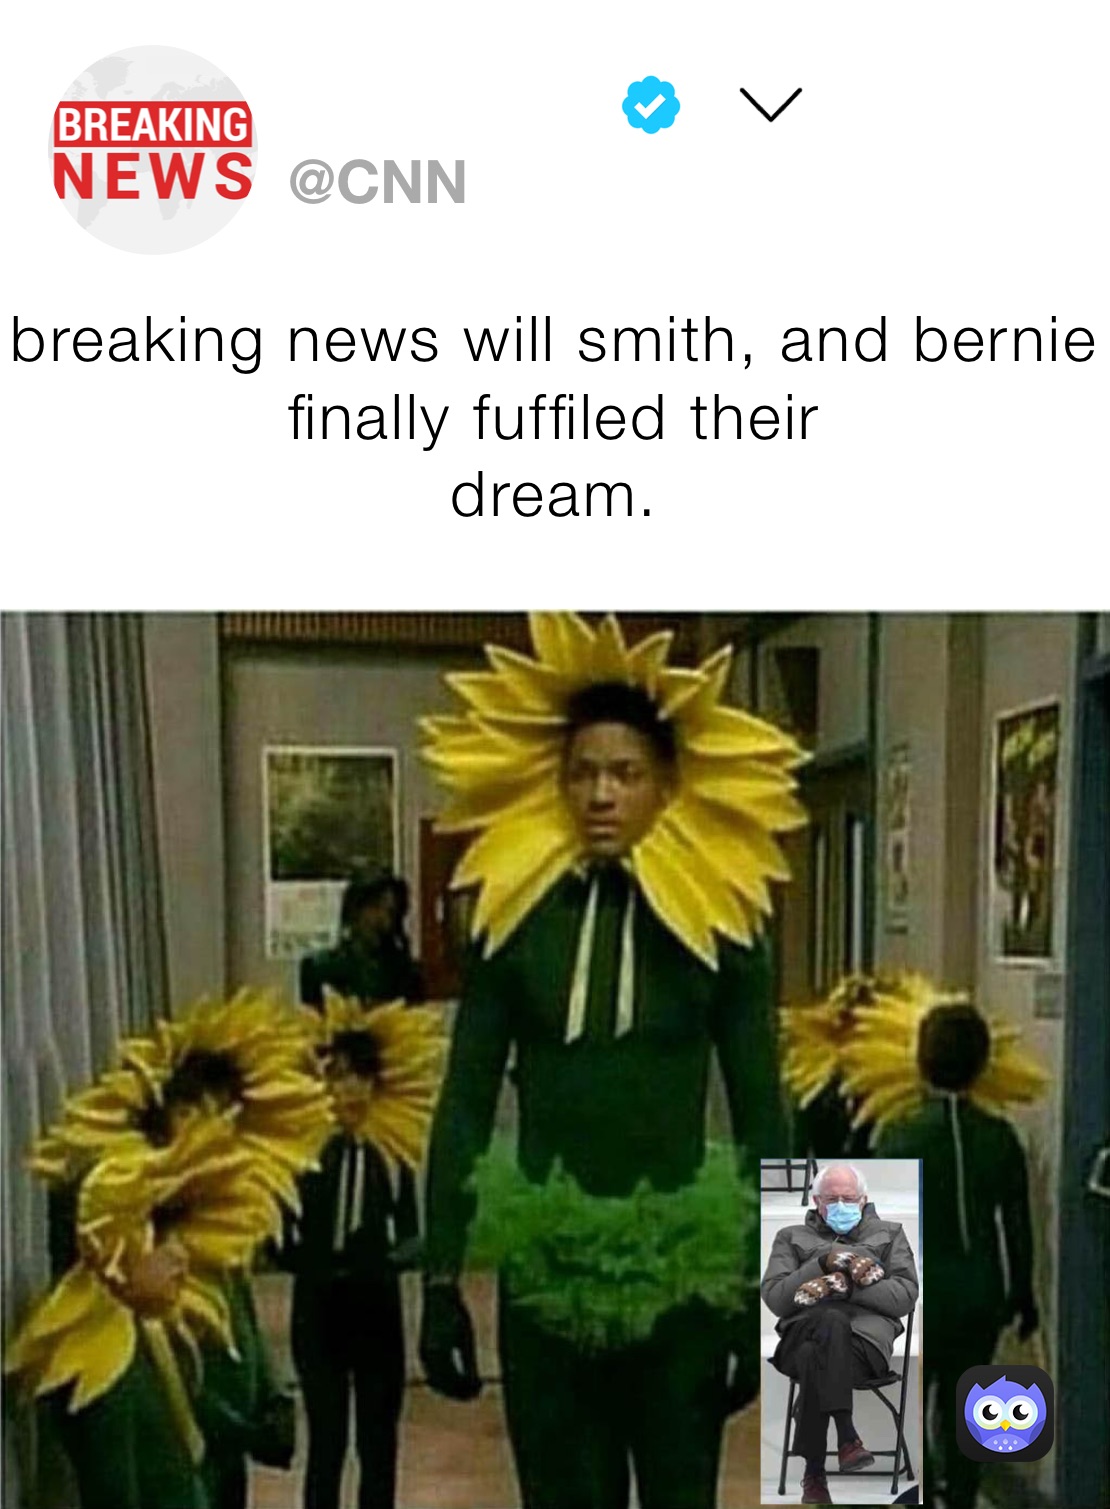 breaking news will smith, and bernie finally fuffiled their 
dream.
